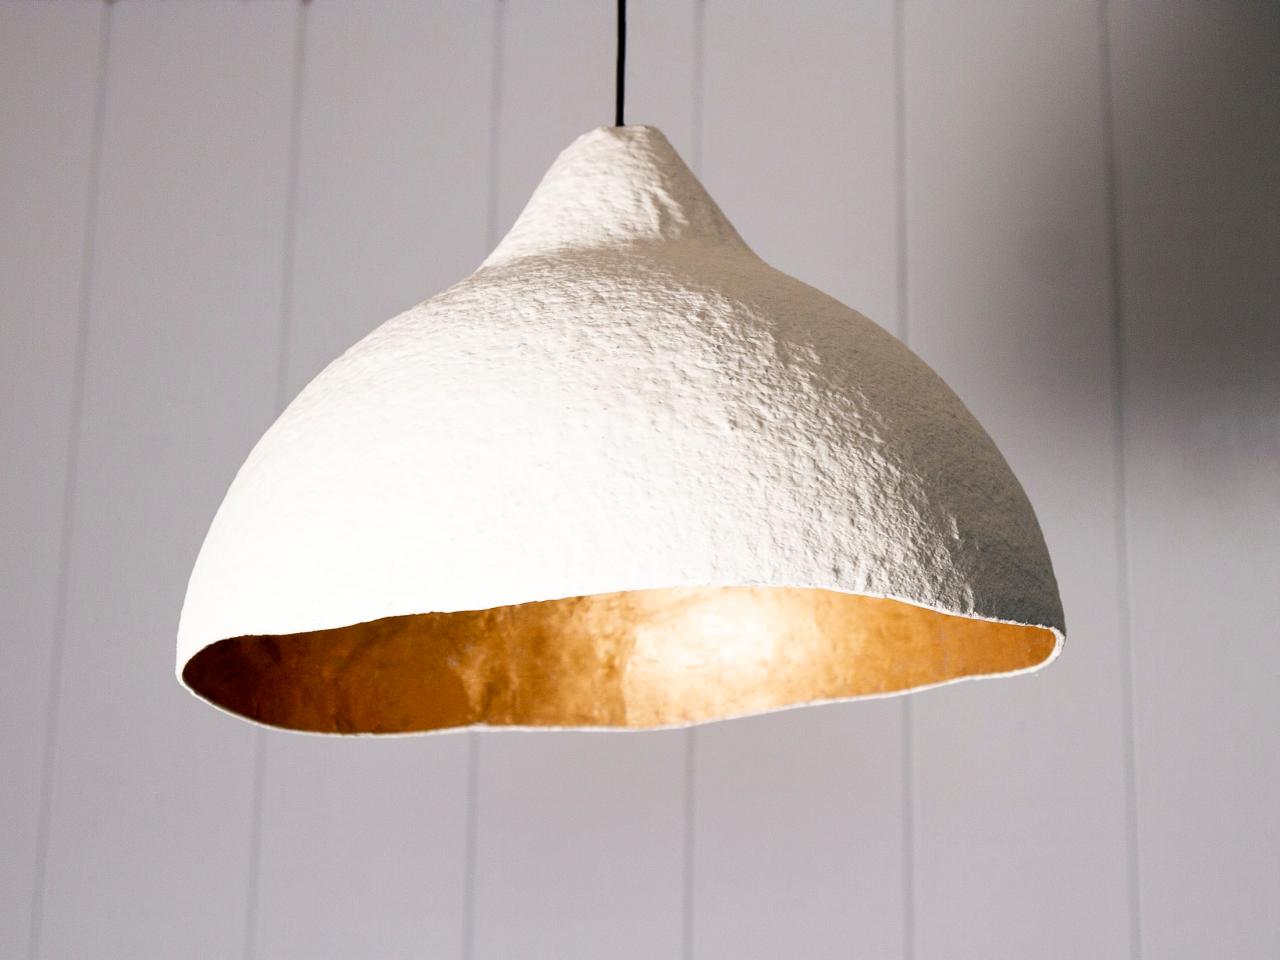 How To Make A Paper Mache Pendant Light, Diy Hanging Lampshade